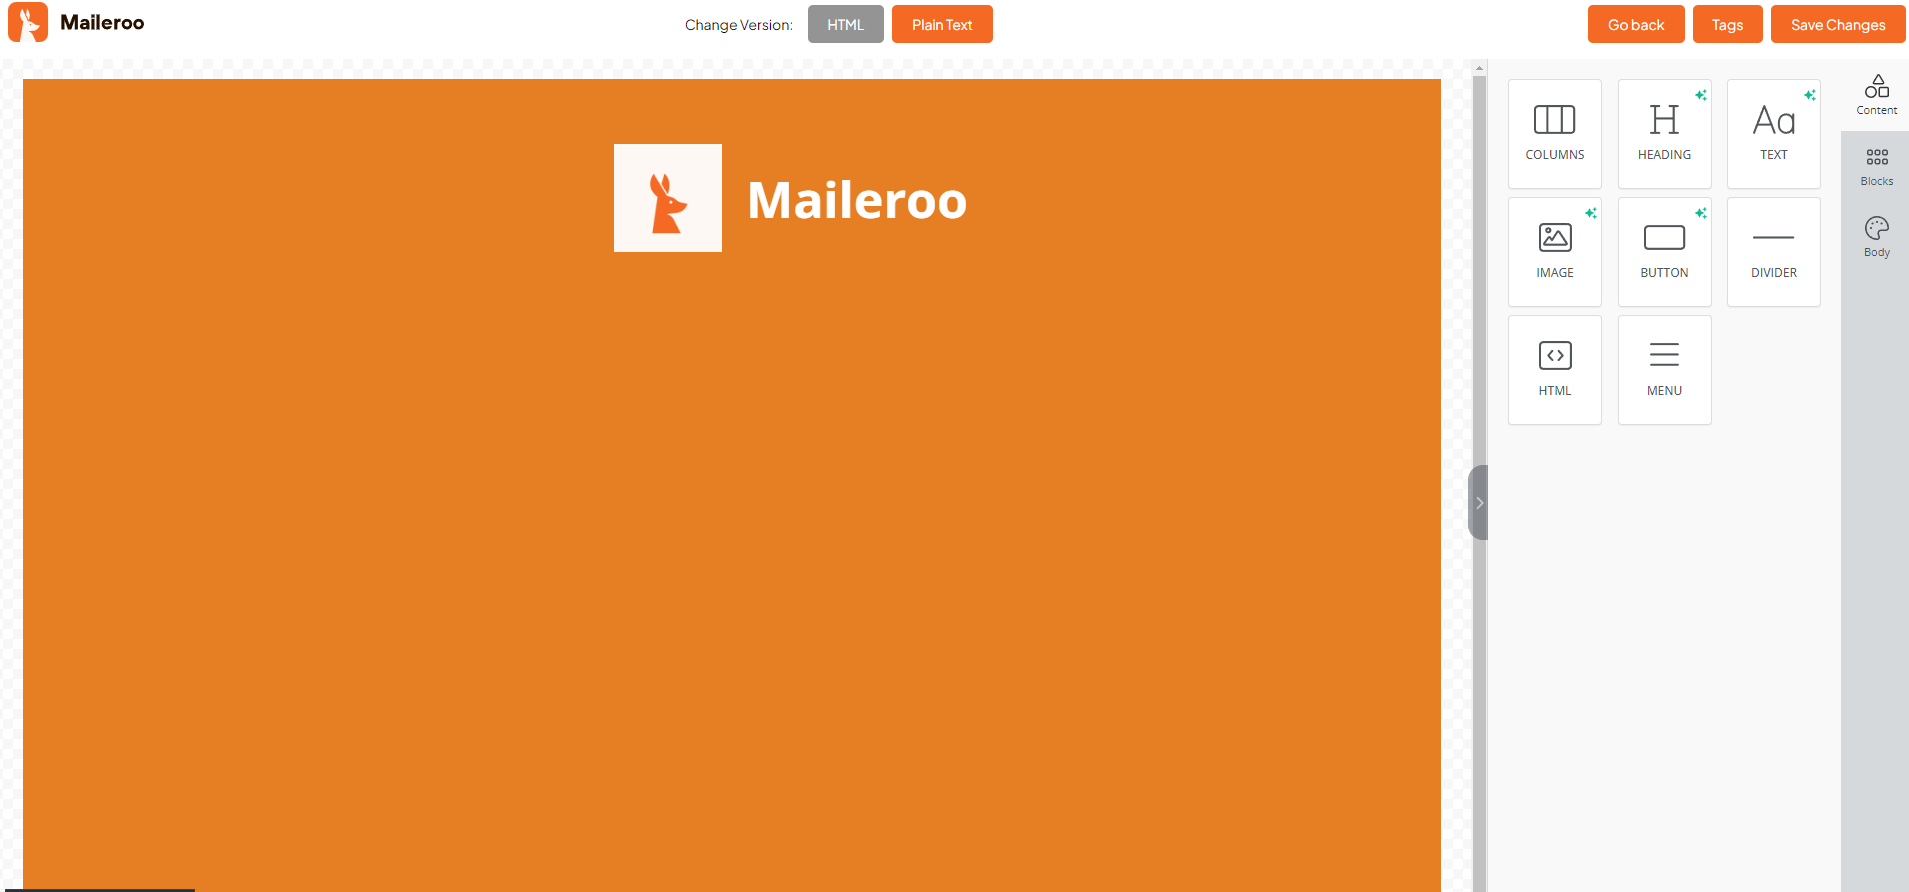 Maileroo example from our free to use email template builder